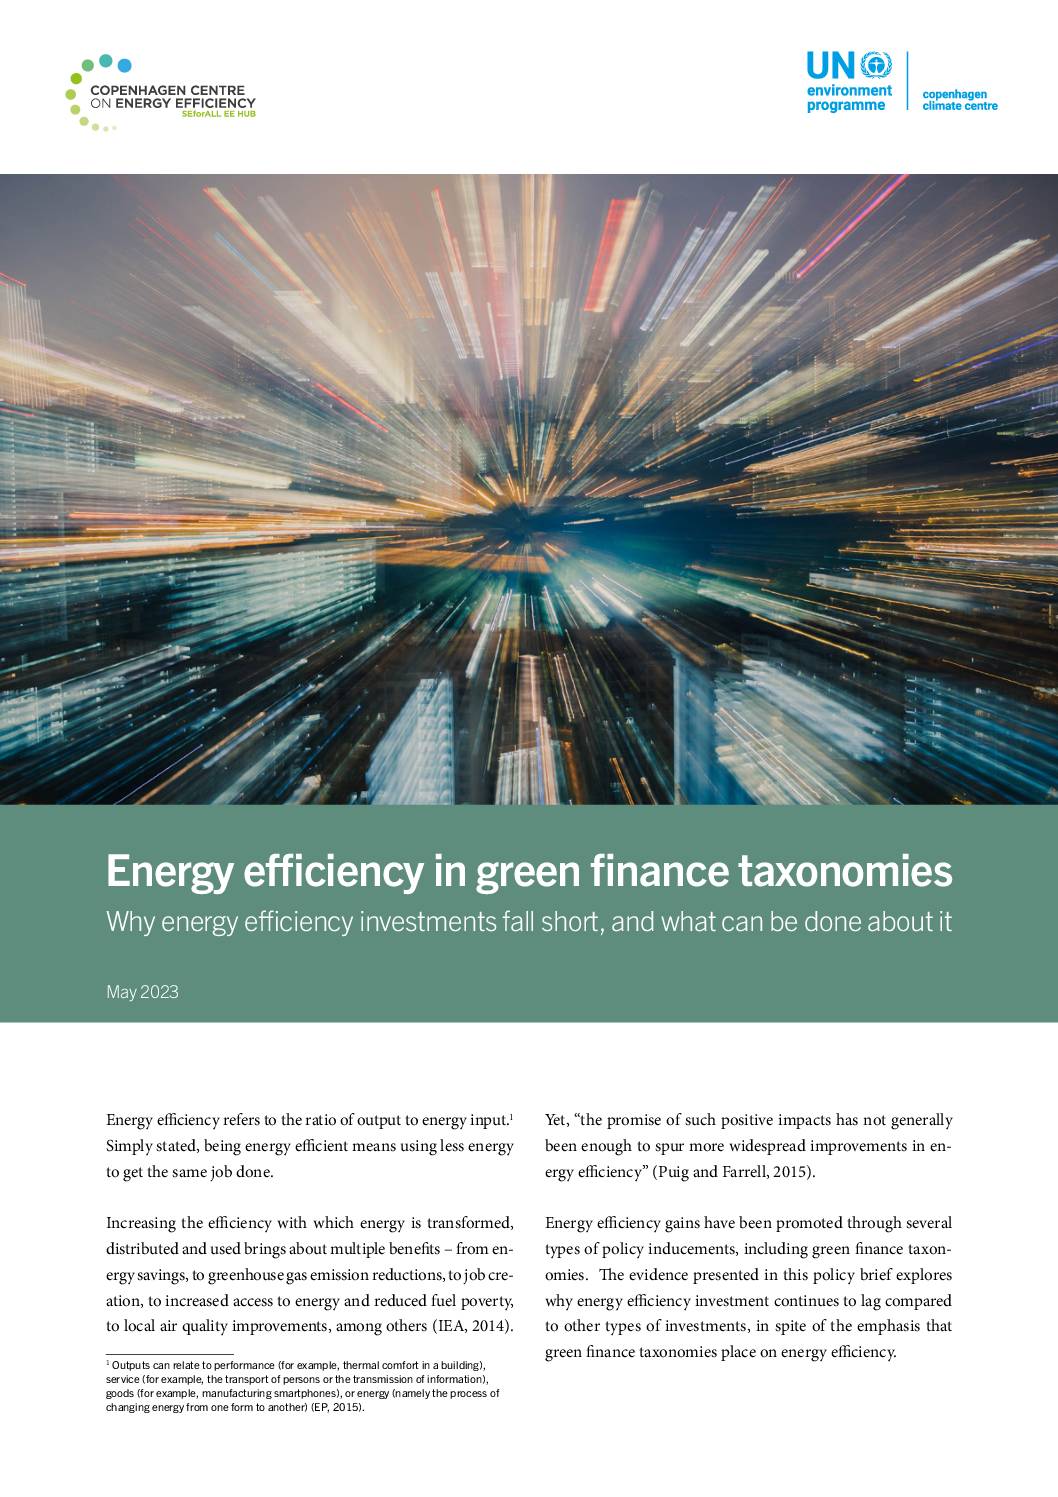 Energy efficiency in green finance taxonomies – Why energy efficiency investments fall short, and what can be done about it